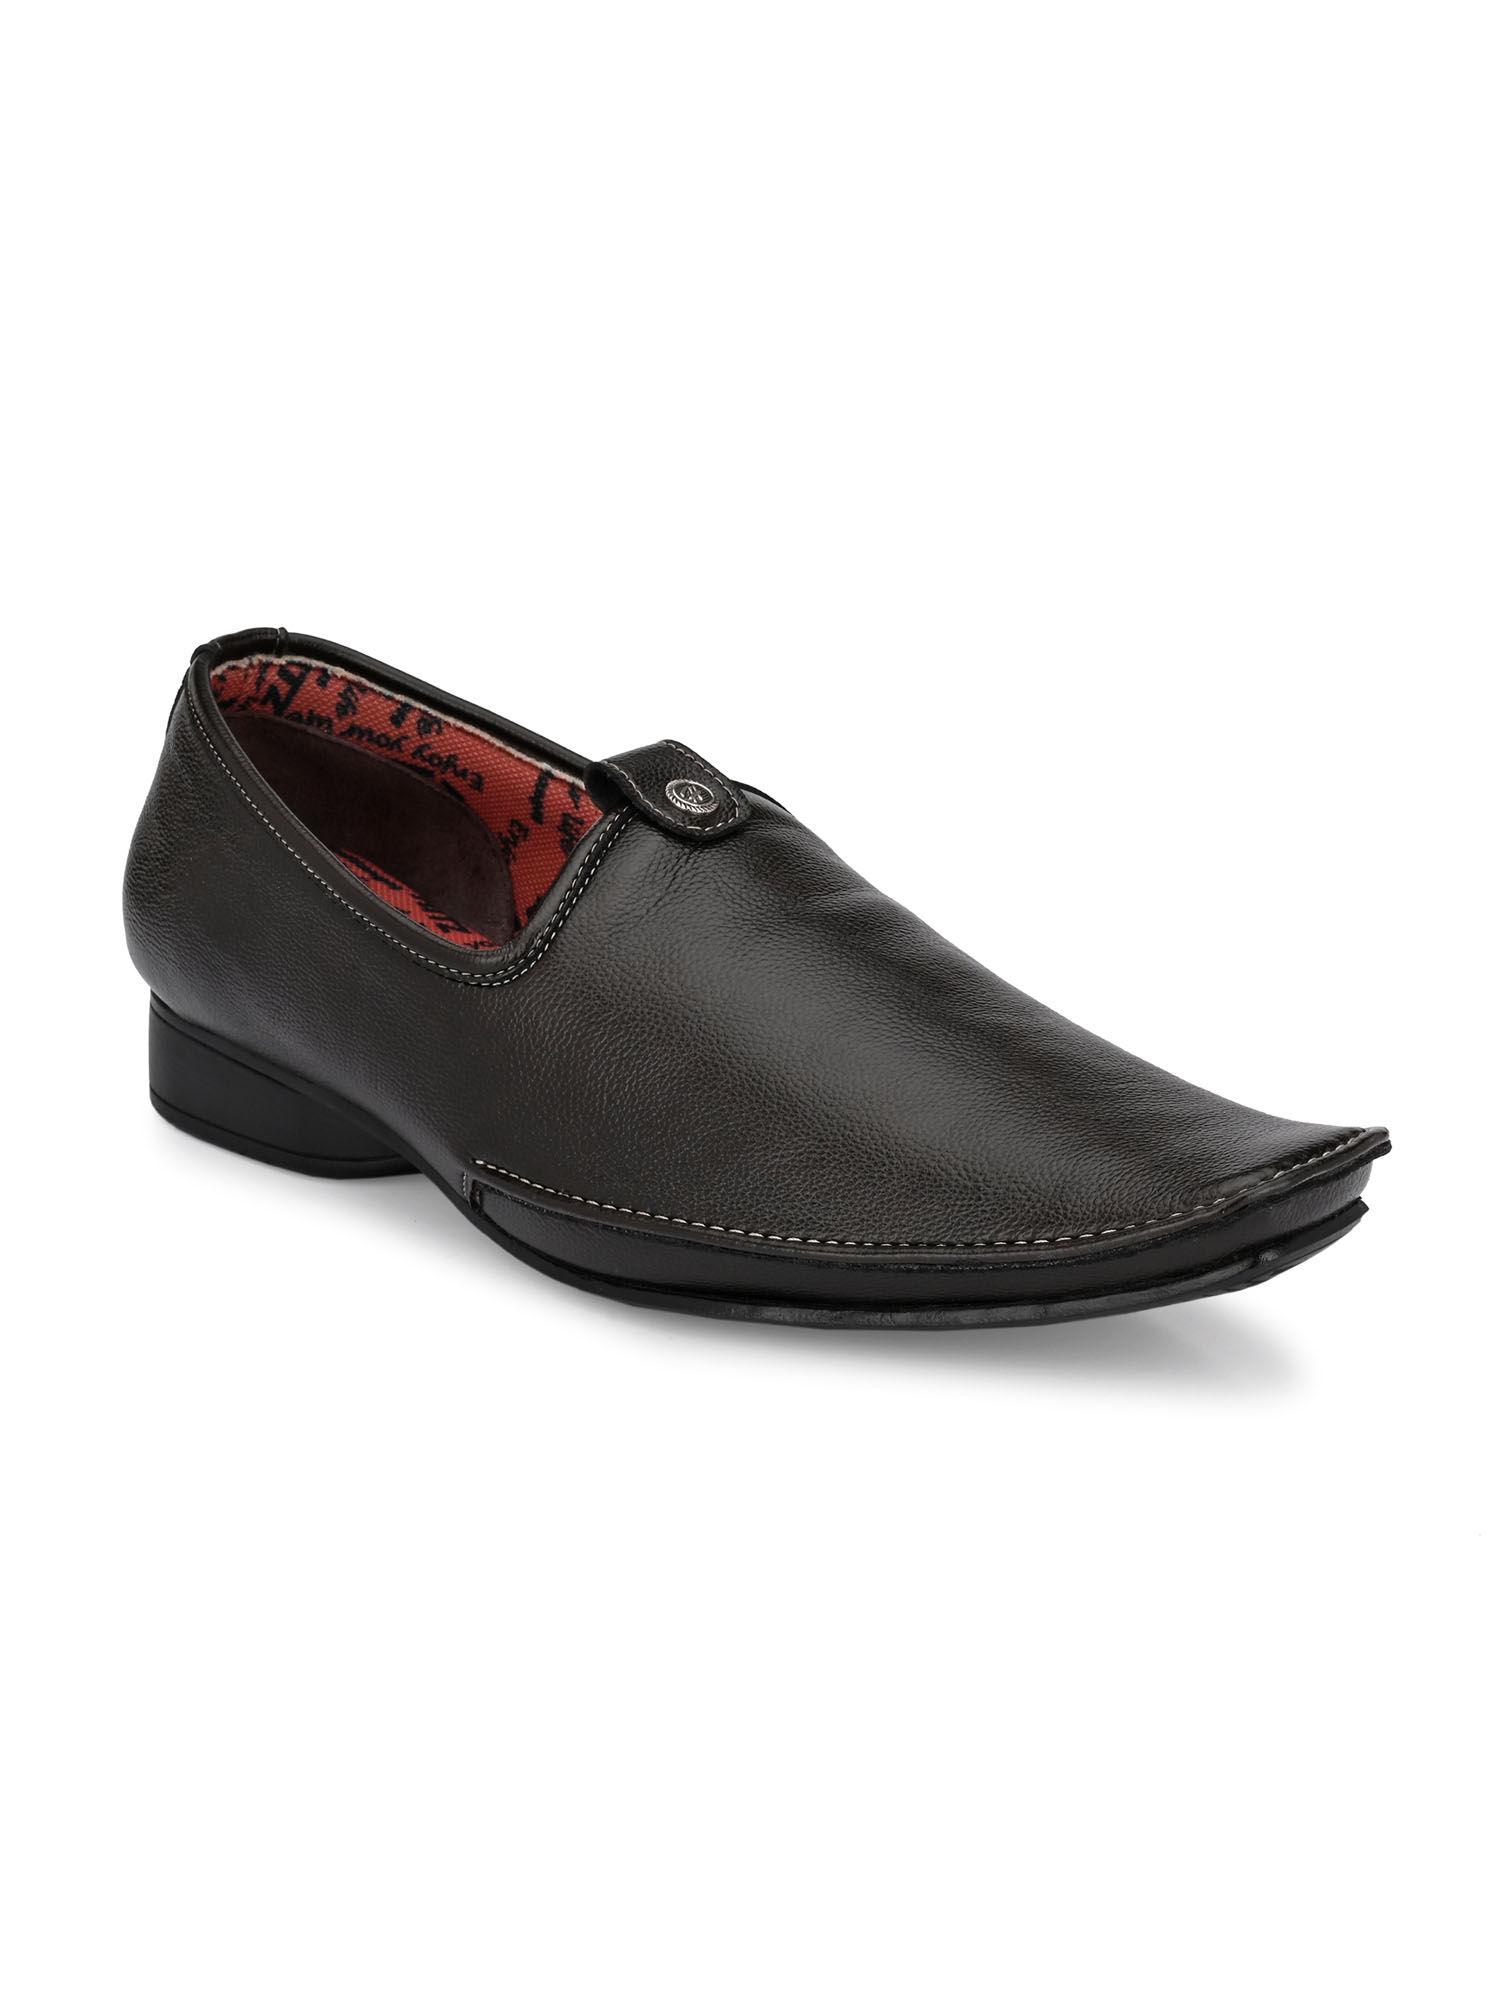 men's brown synthetic slip-on ethnic shoes